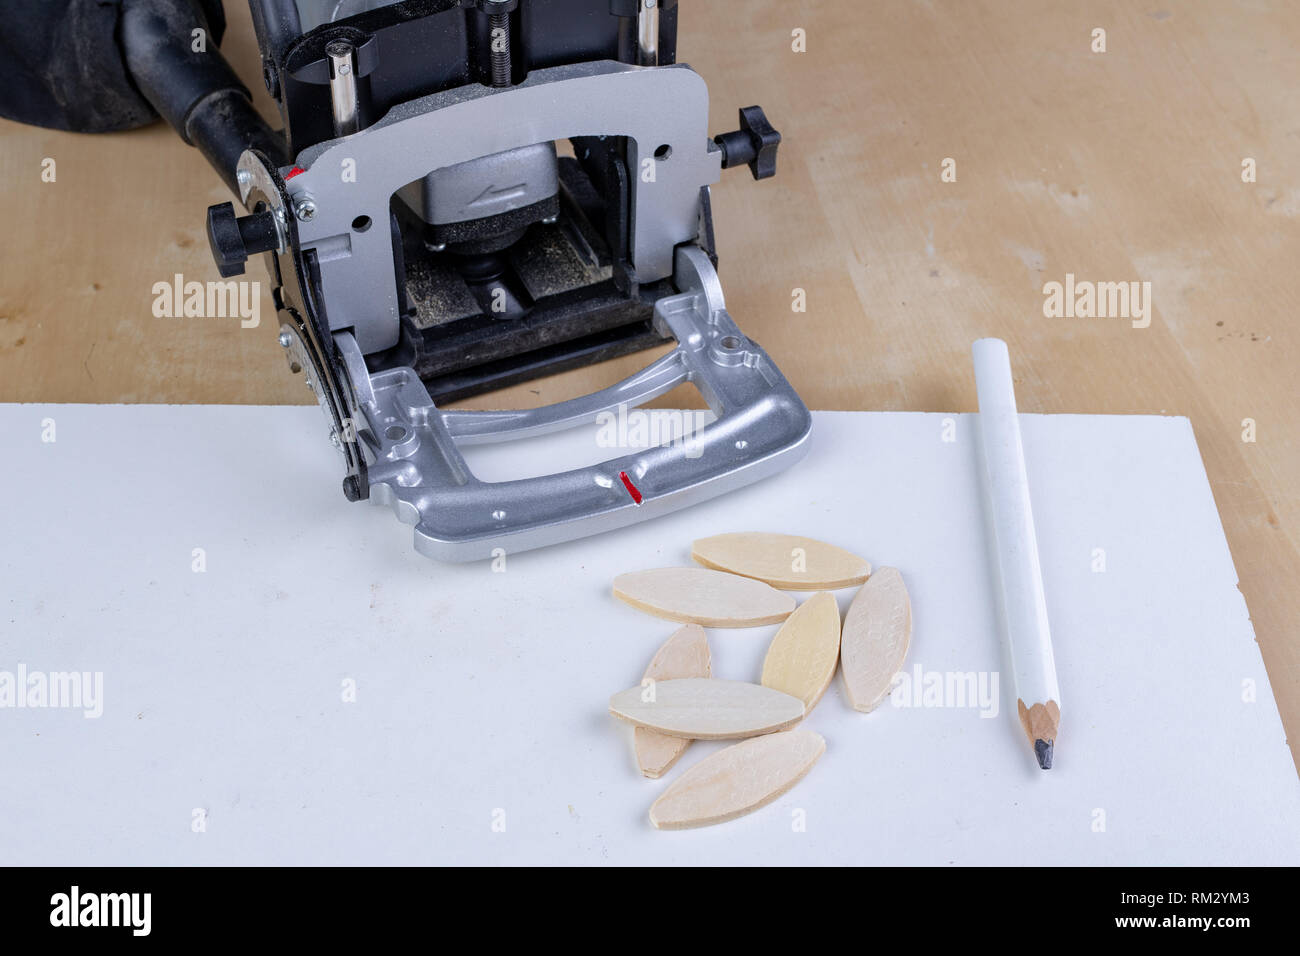 Joinery works in the workshop using sipes and a special milling machine. Light background. Stock Photo